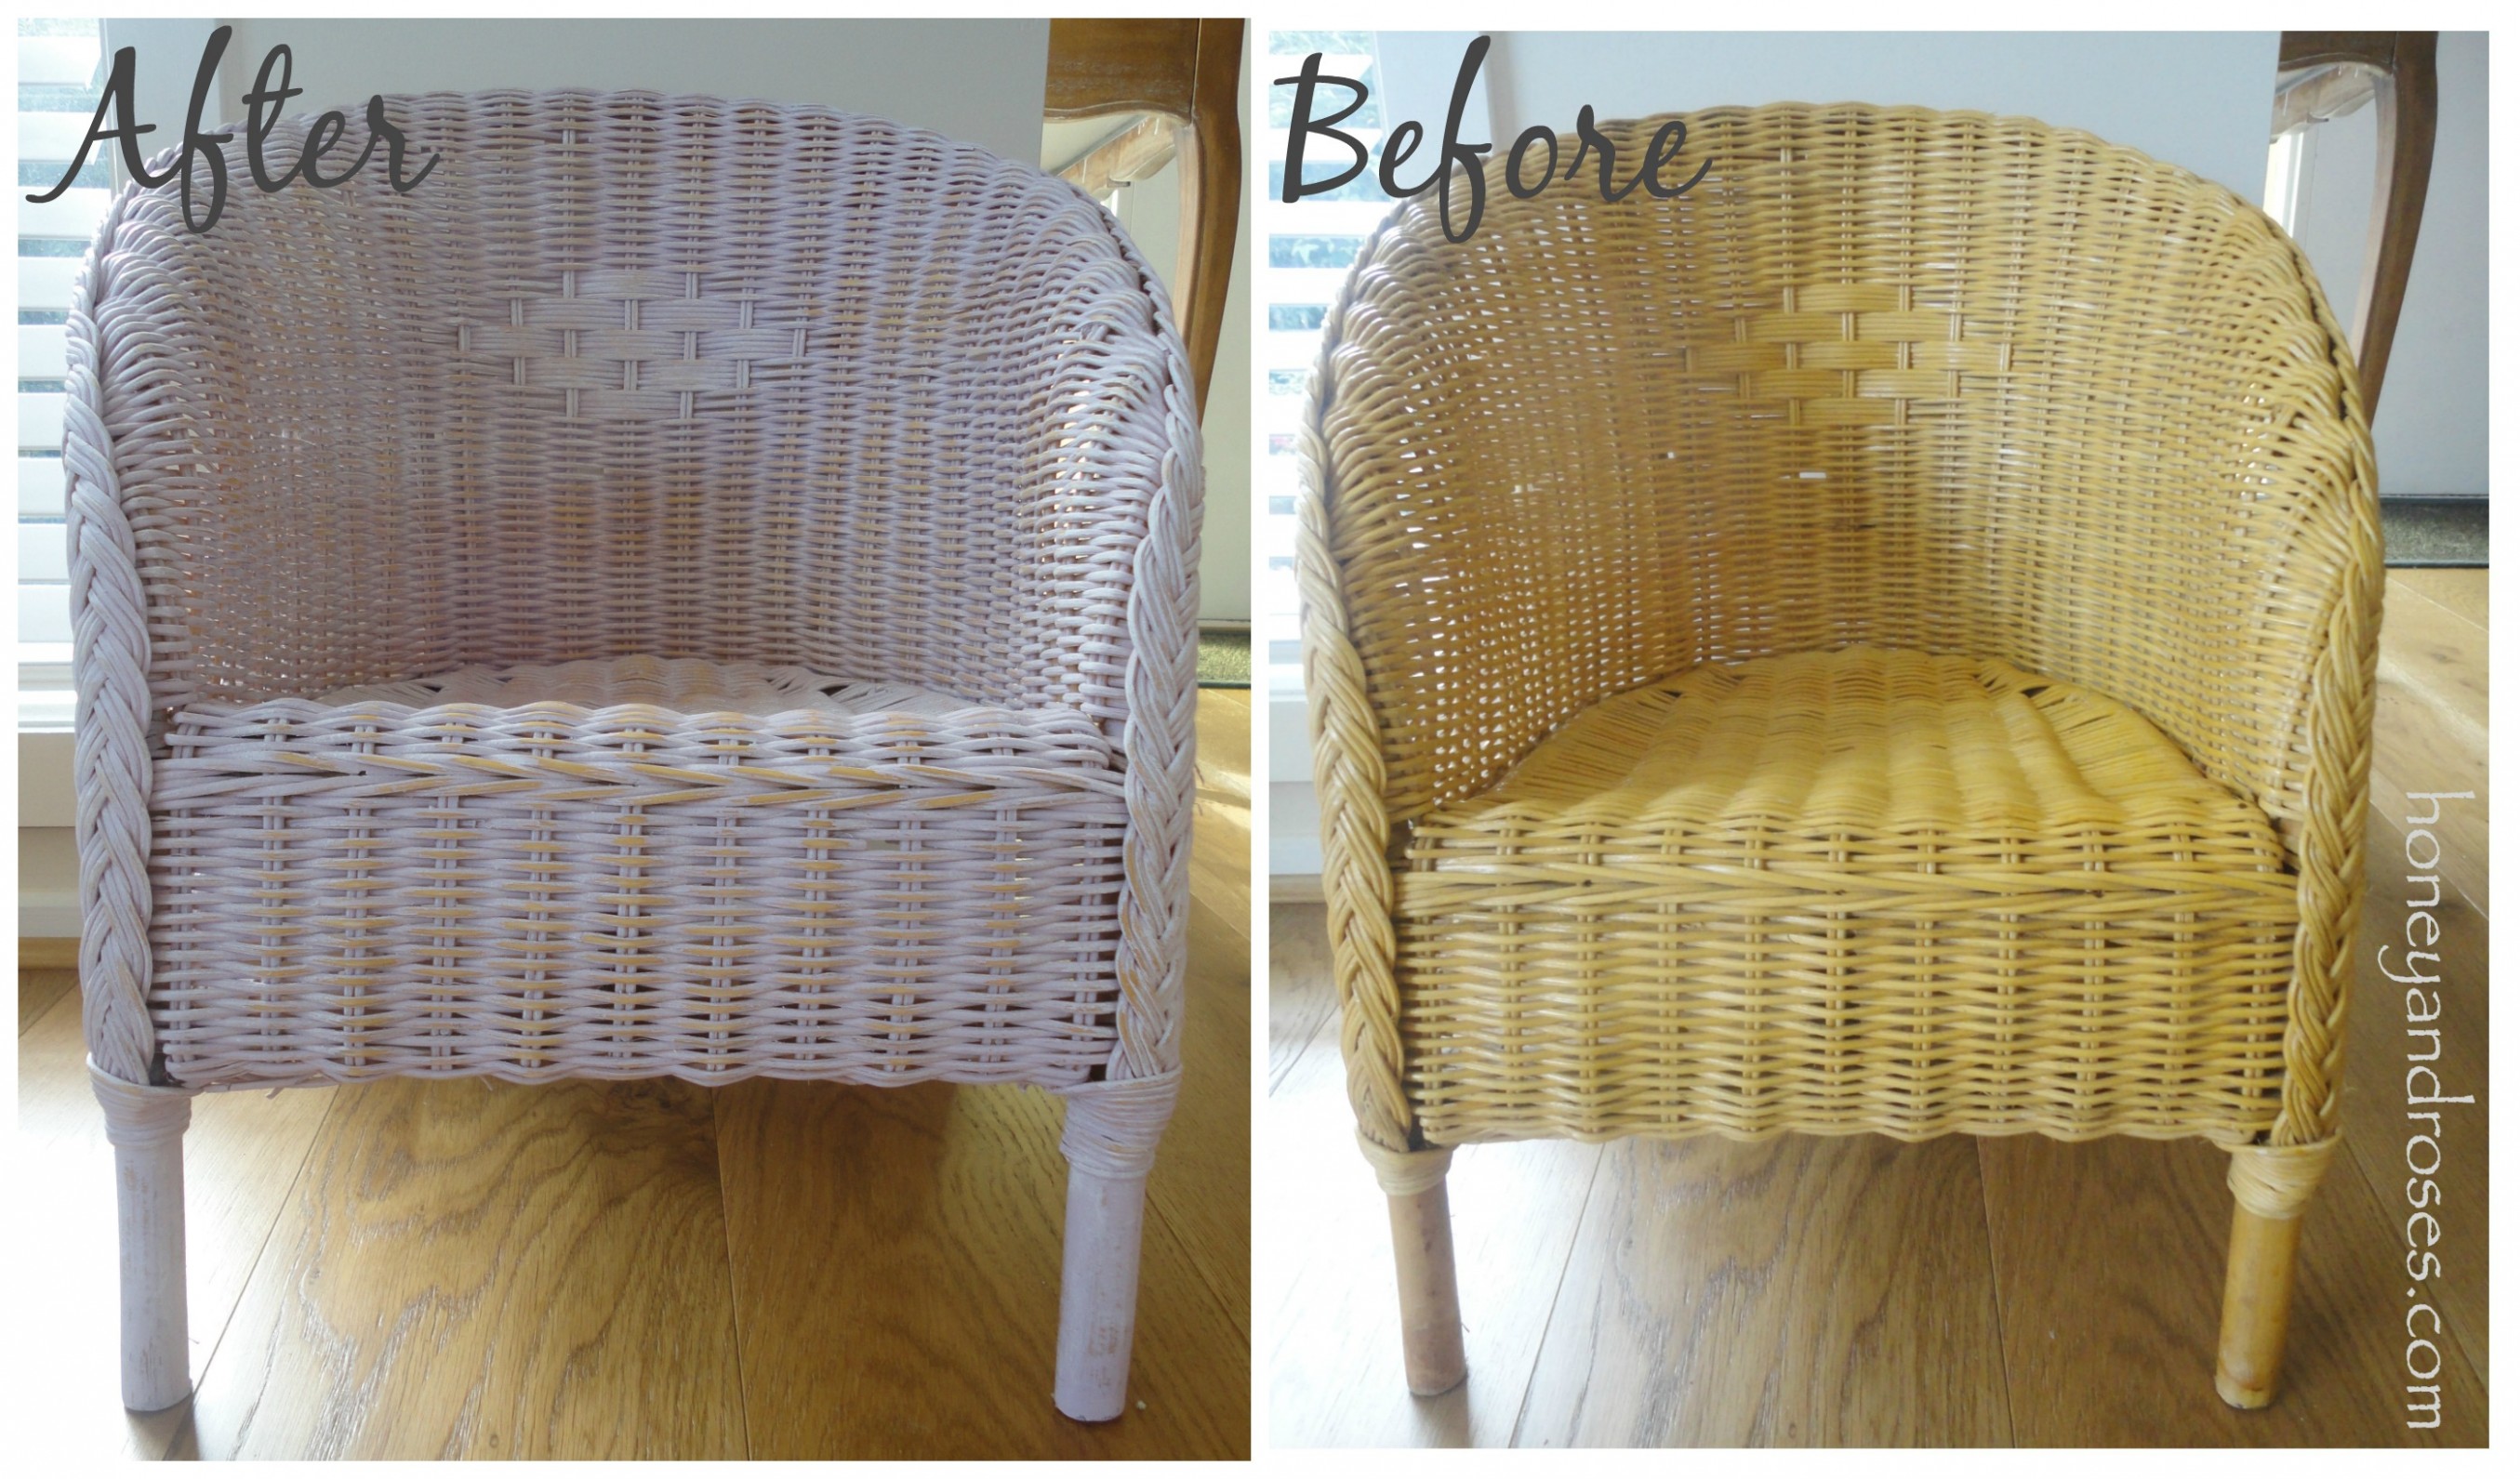 How To Paint A Wicker Chair With Chalk Paint | Honey & Roses Can You Use Chalk Paint Over Normal Paint